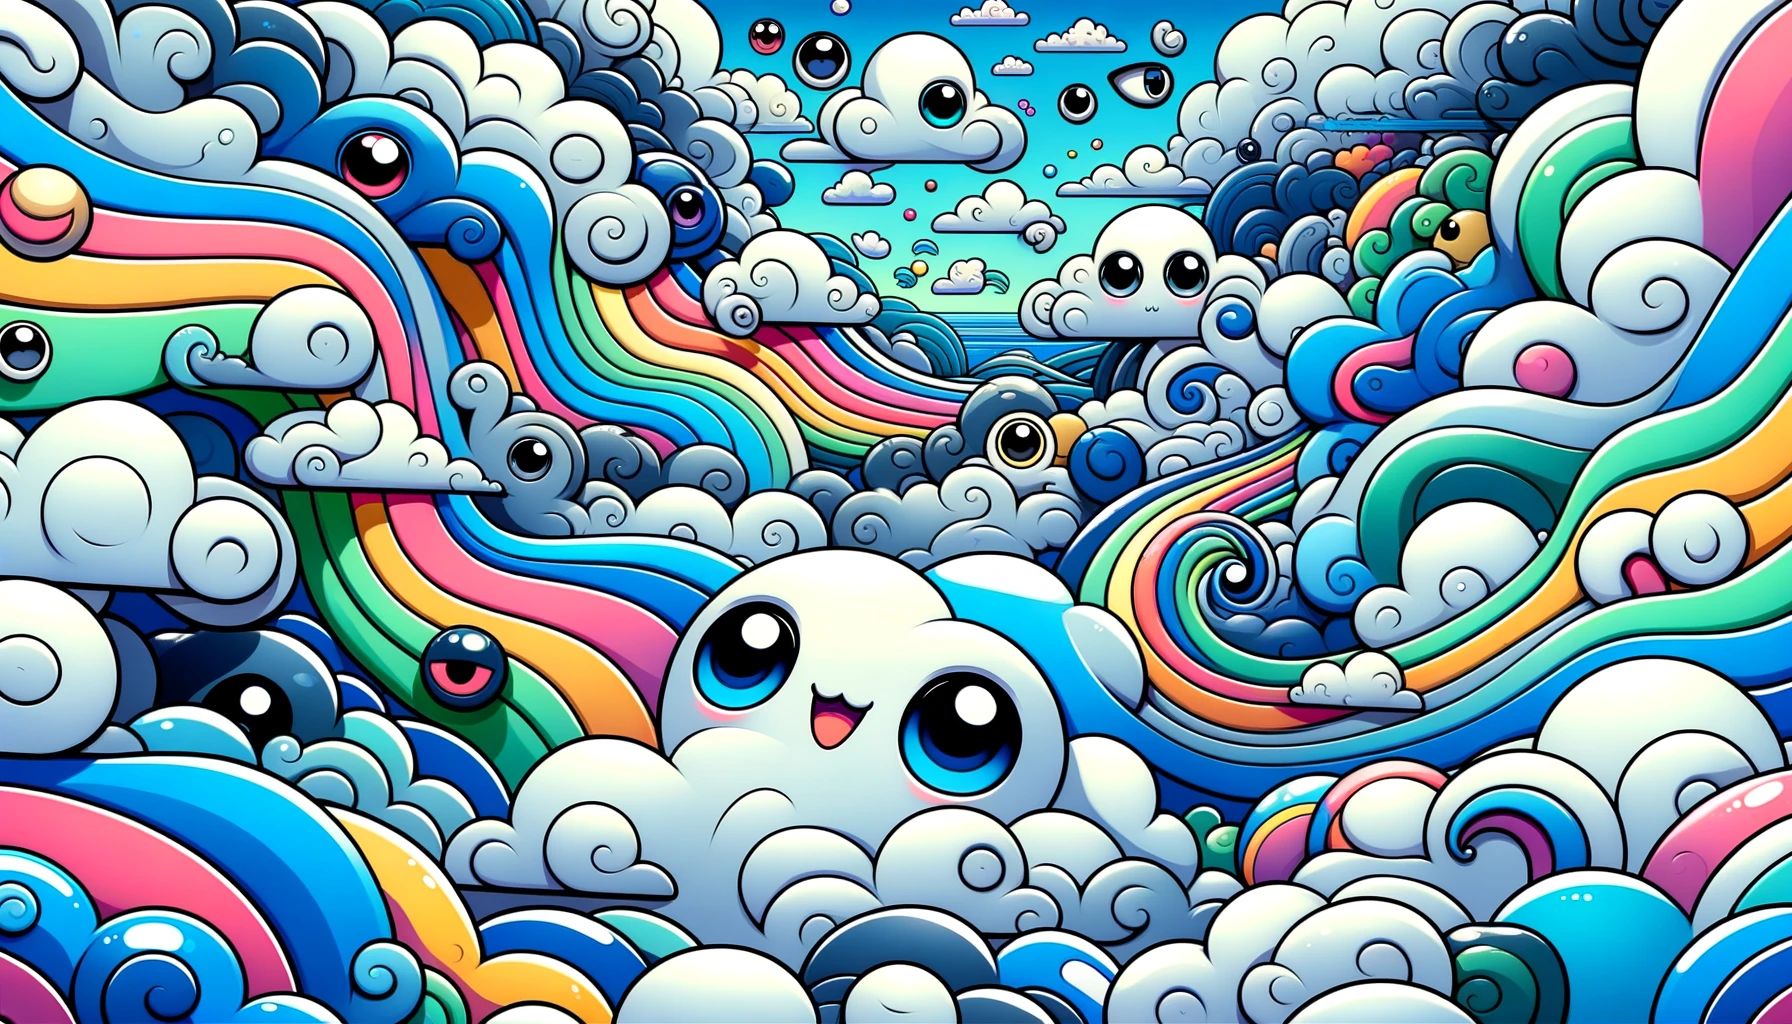 Prompt: the funny cartoon clouds screenshot thumbnail, styled as a macro photograph with extreme close-up details, featuring colorful curves, kawaii manga aesthetic, influenced by the Blue Rider art movement, with sky-blue and green hues, integrating jump cuts and frogcore themes, serenity, peace, infinity, a sky full of possibilities in high-definition 3d in wide ratio